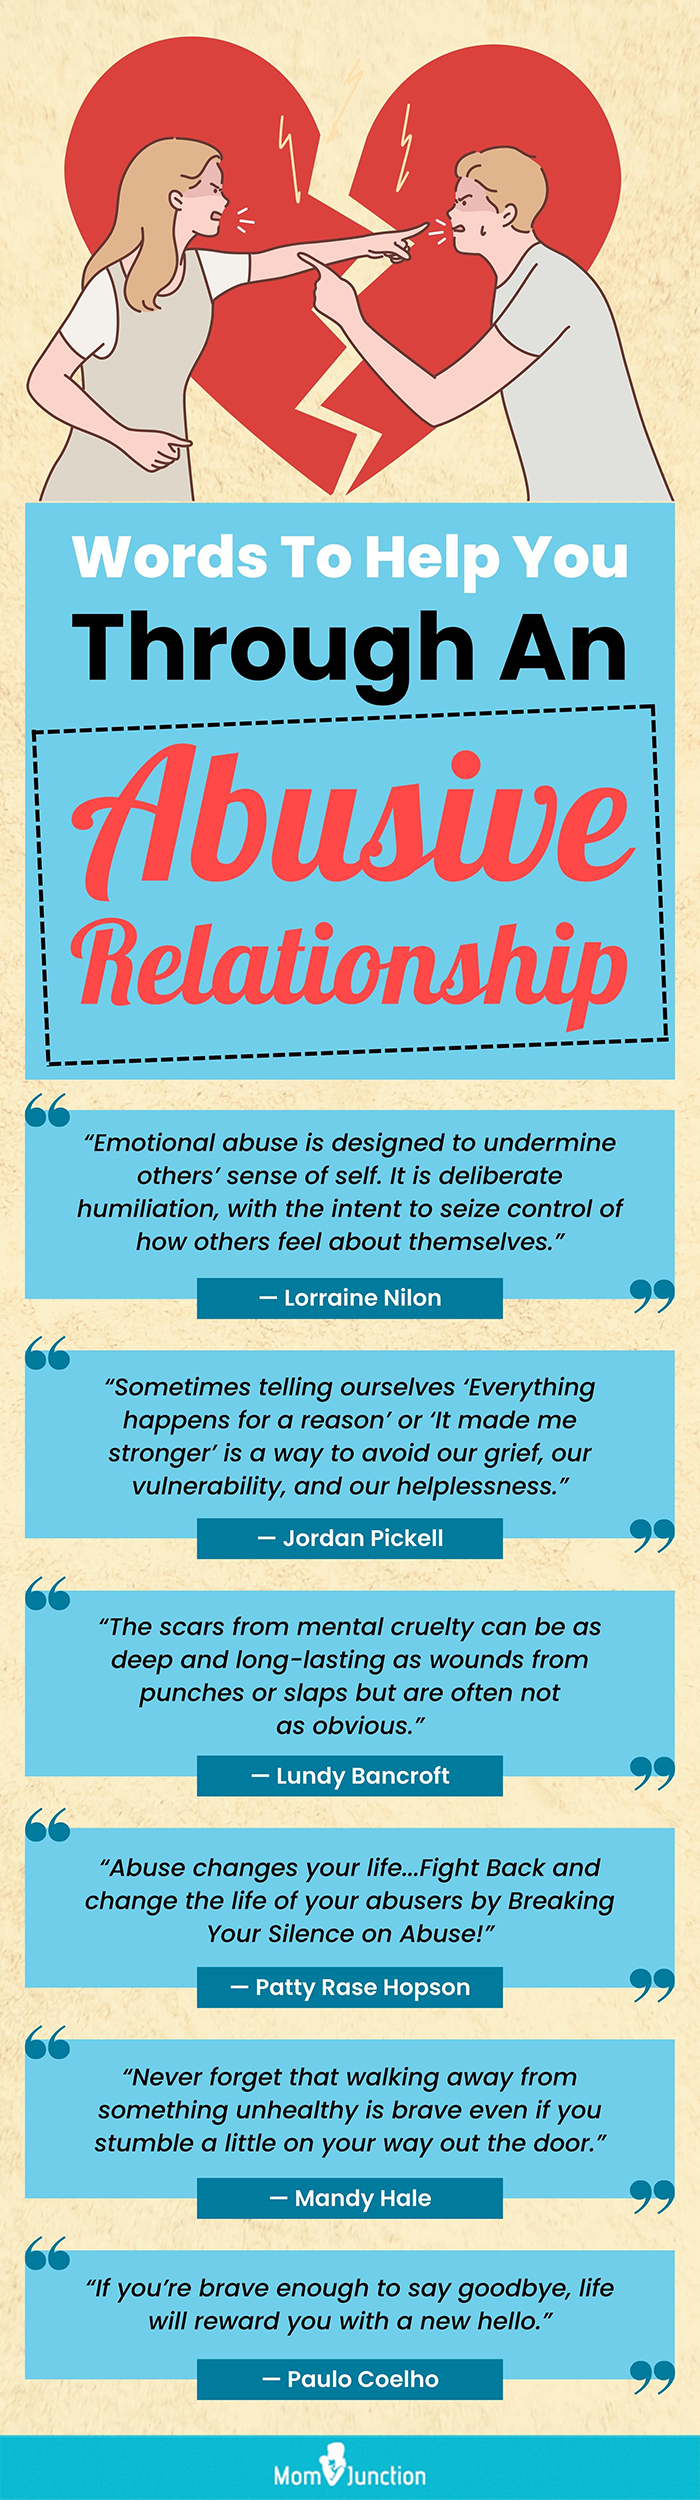 75 Abusive Relationship Quotes and Sayings To Move On image